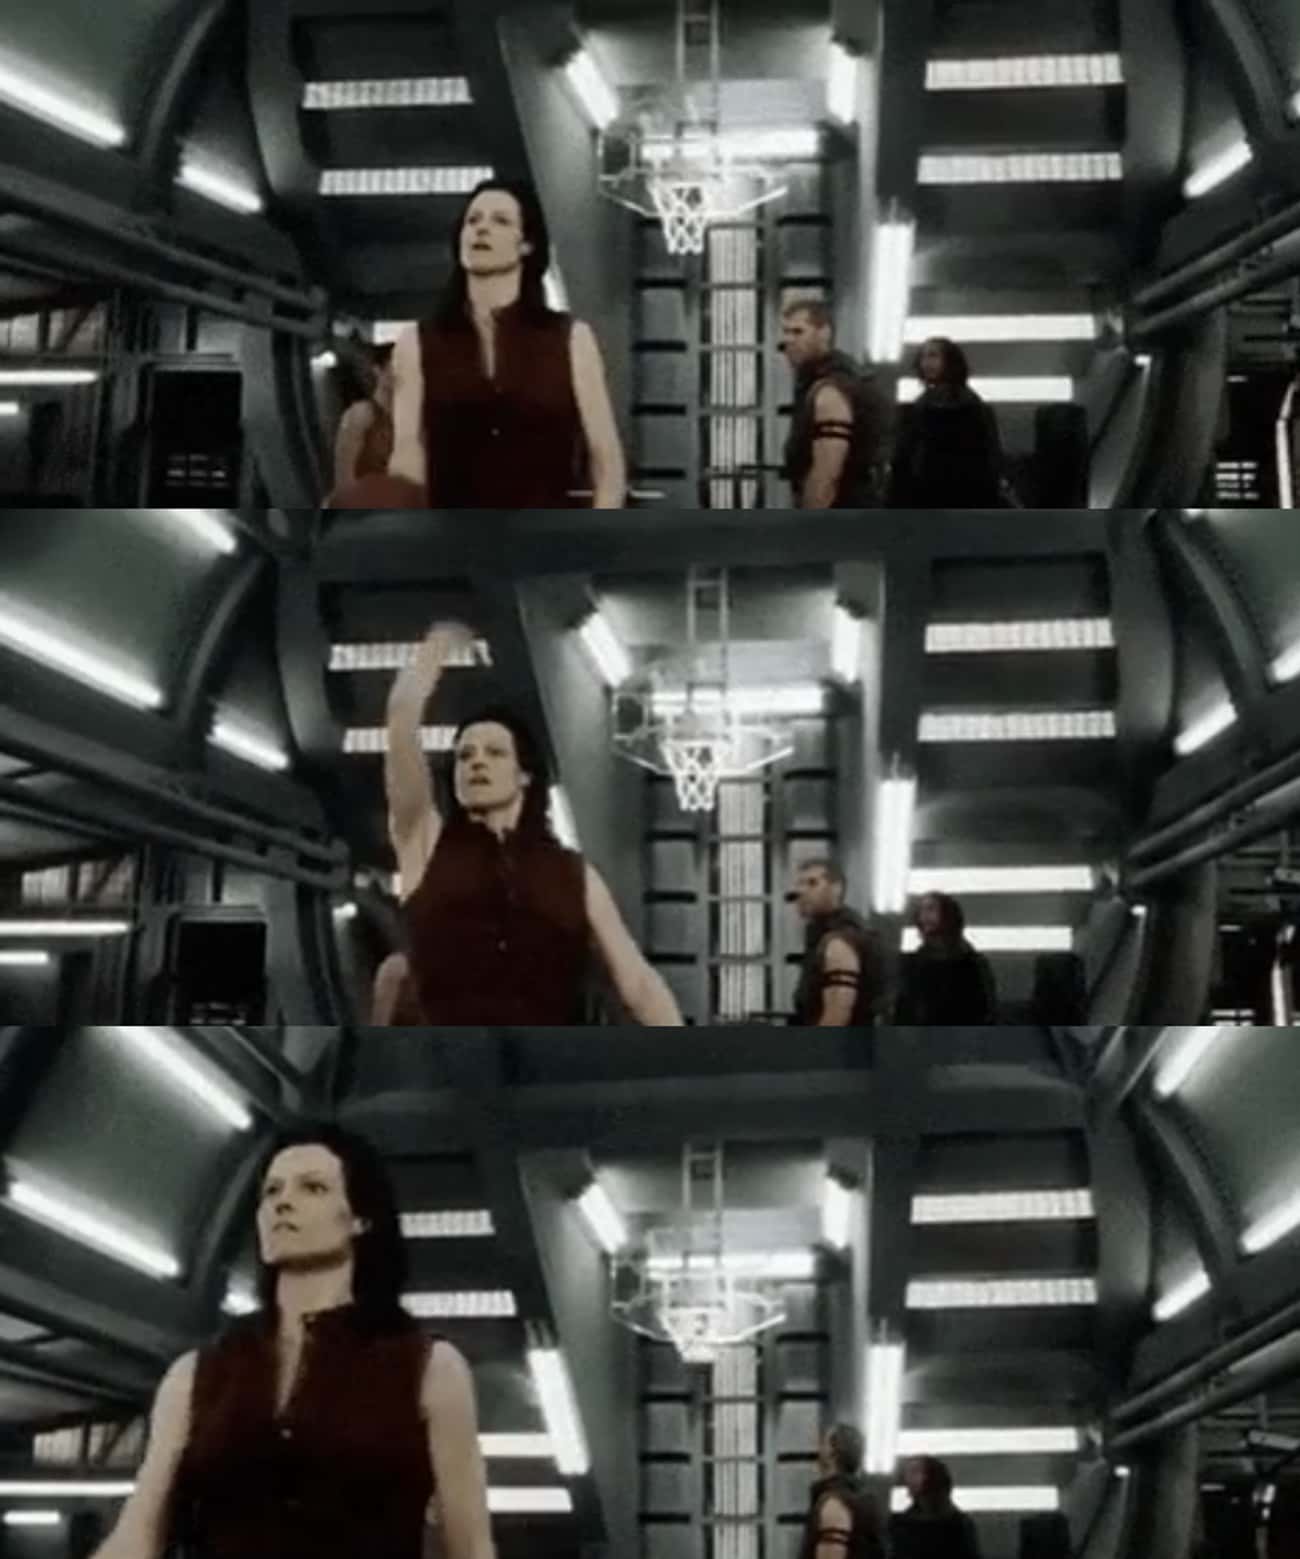 She Really Made That One-In-A-Million Basketball Shot For 'Alien Resurrection'